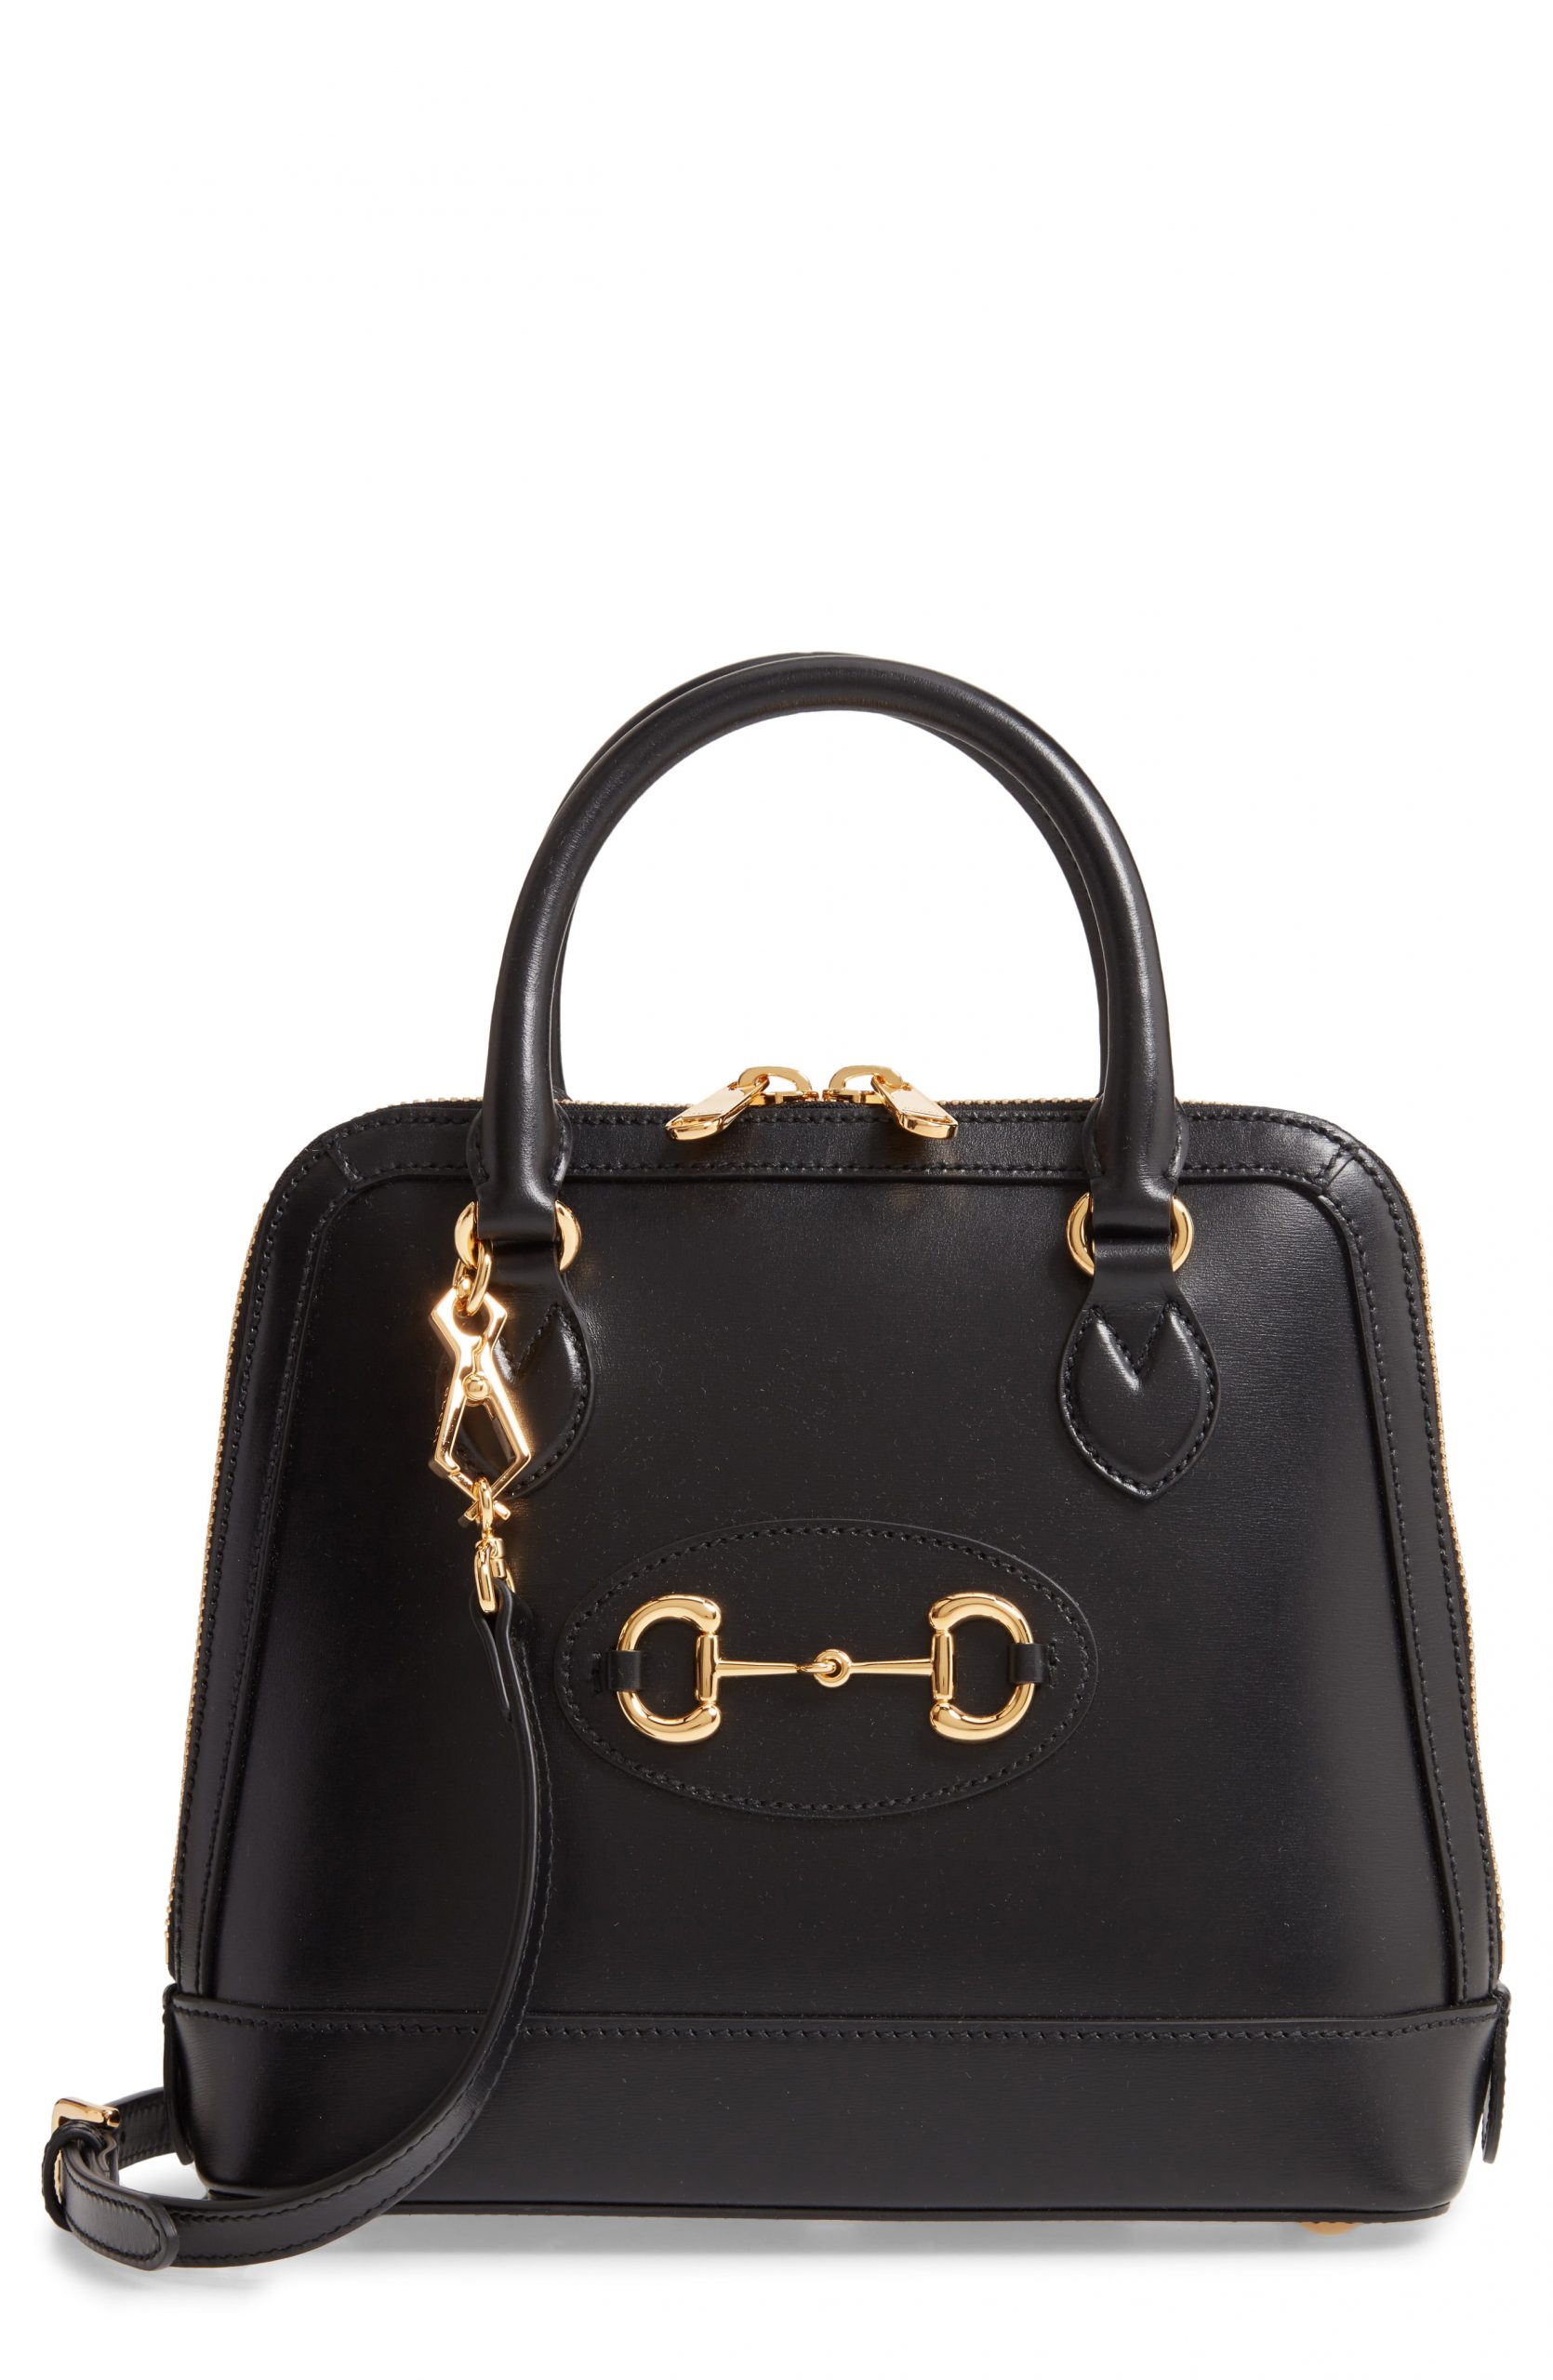 A Timeless Classic Icon: Gucci 1955 Horsebit Bag - Her Style Code